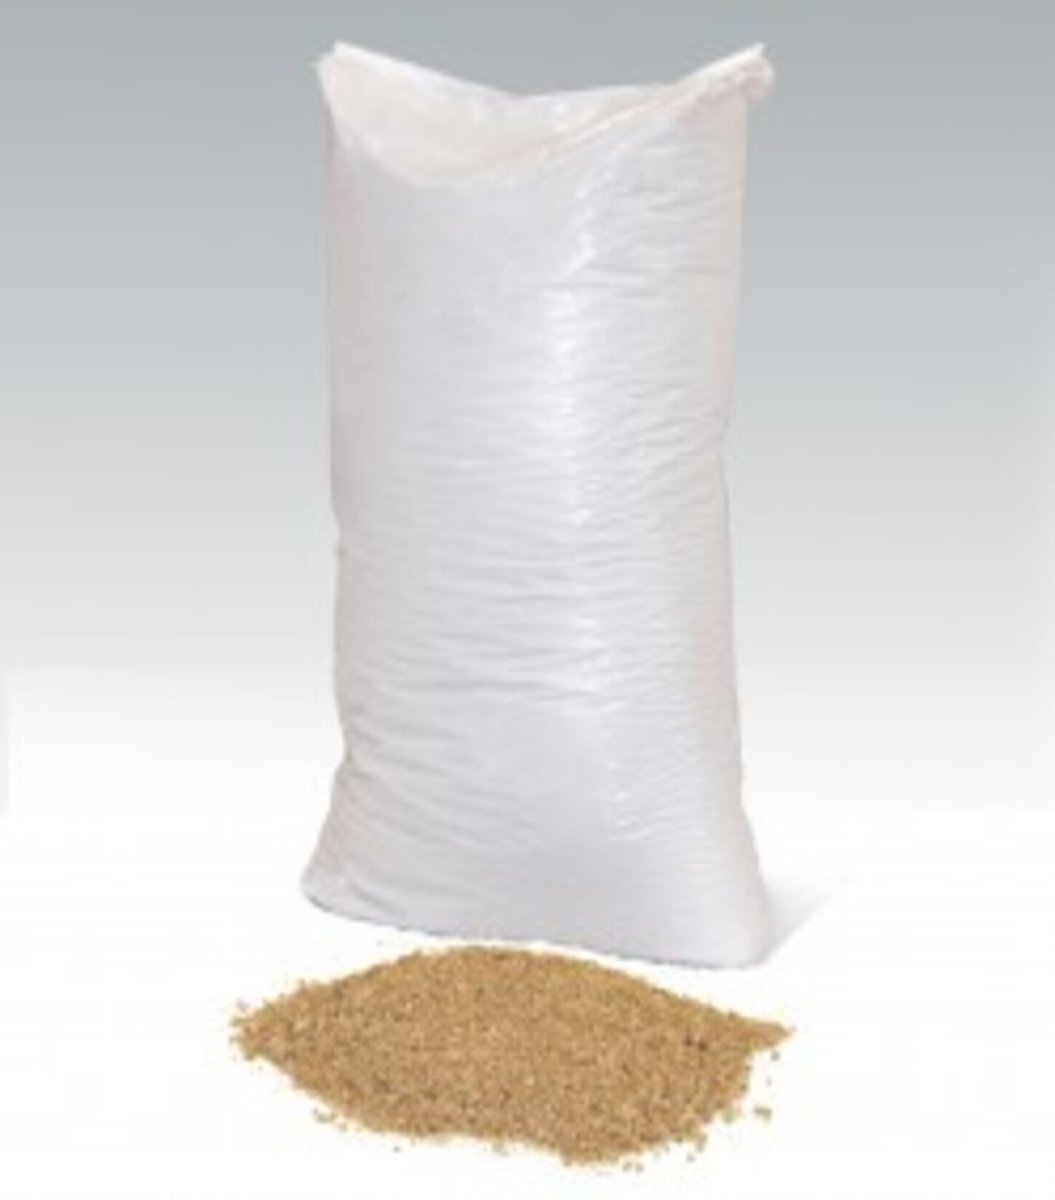 Shock and liquid absorbing packing material - vermiculite - SGS Netherlands